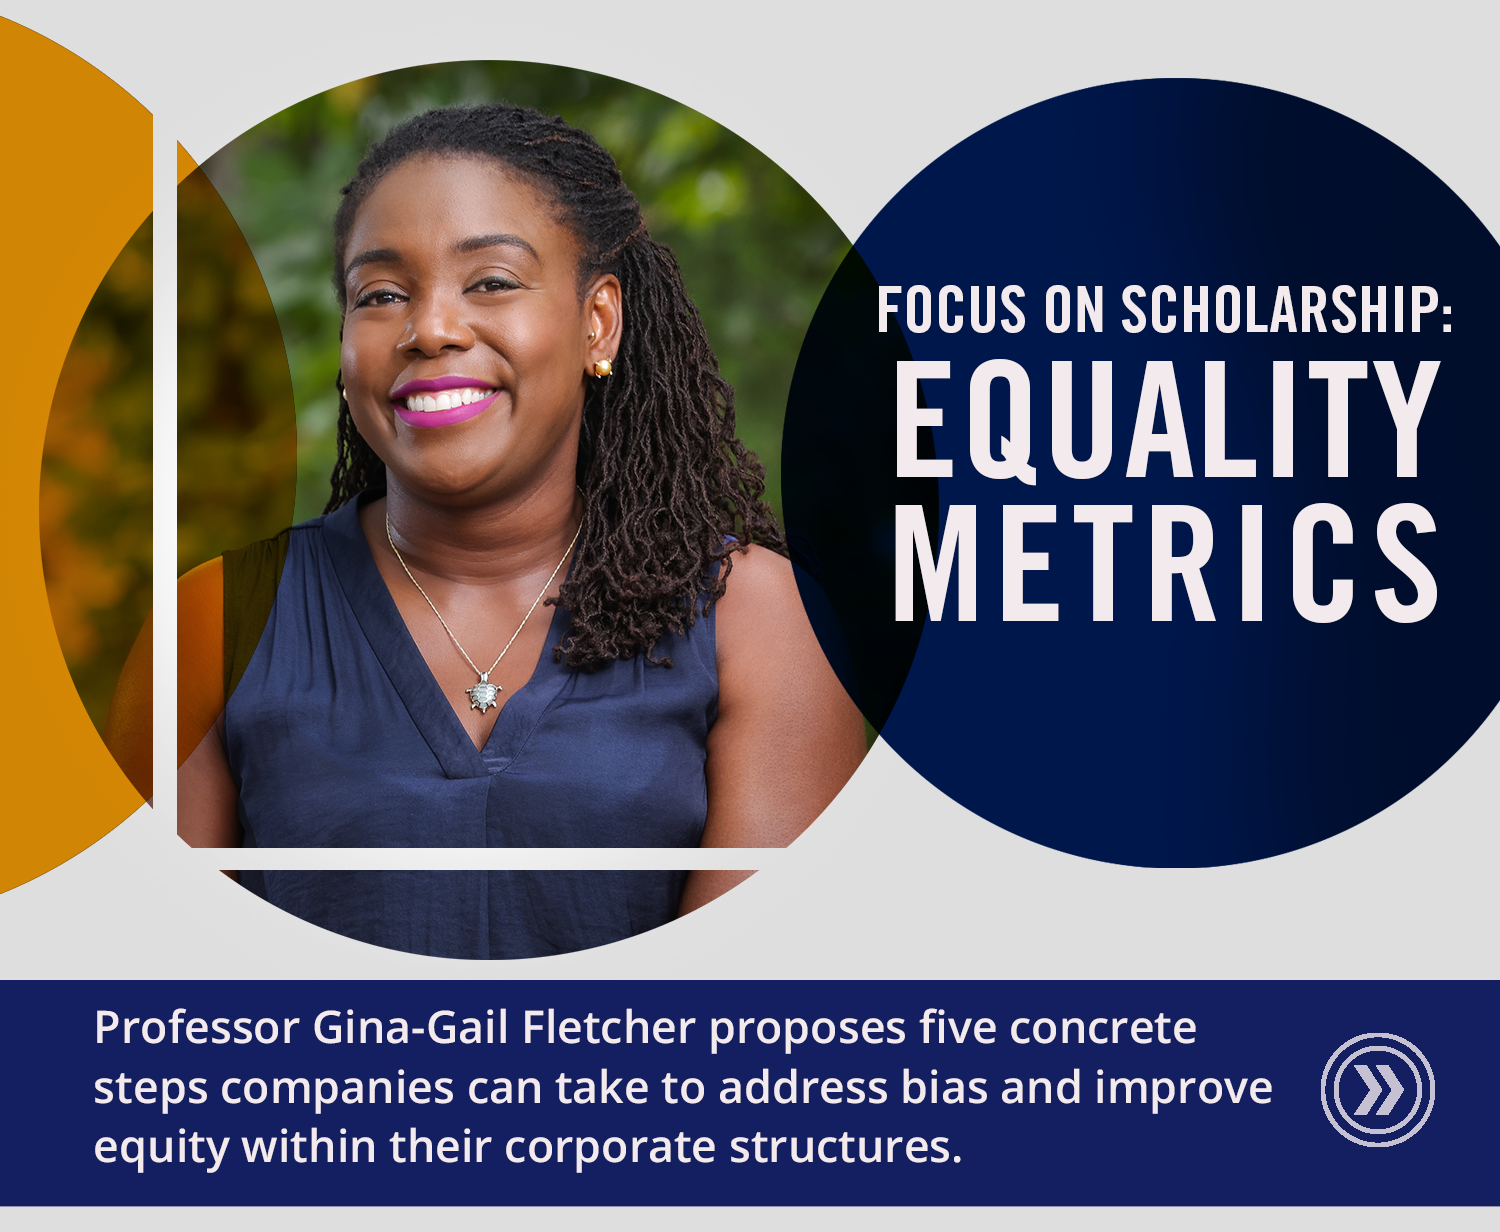 Image: Focus on Scholarship: Equality Metrics. Professor Gina-Gail Fletcher proposes 5 concrete steps companies can take to address bias and improve equity within their corporate structures.